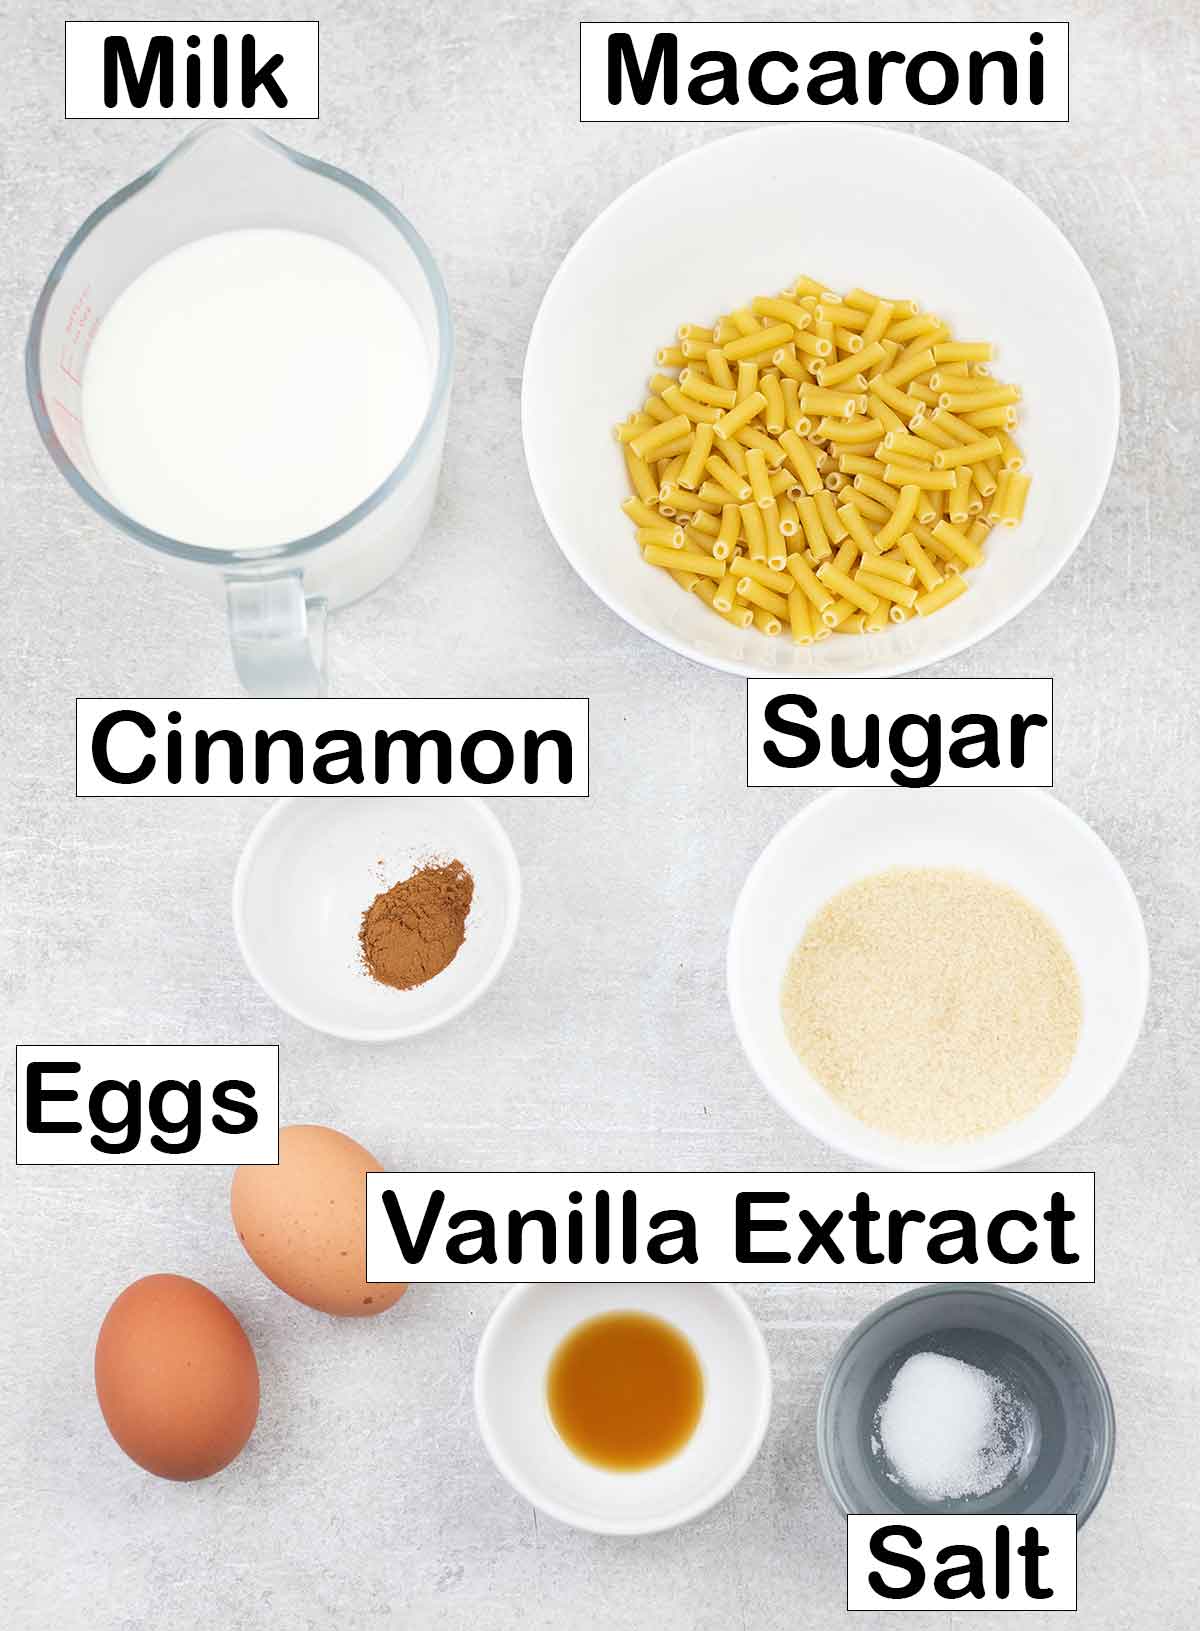 Labeled ingredients for the macaroni pudding recipe.